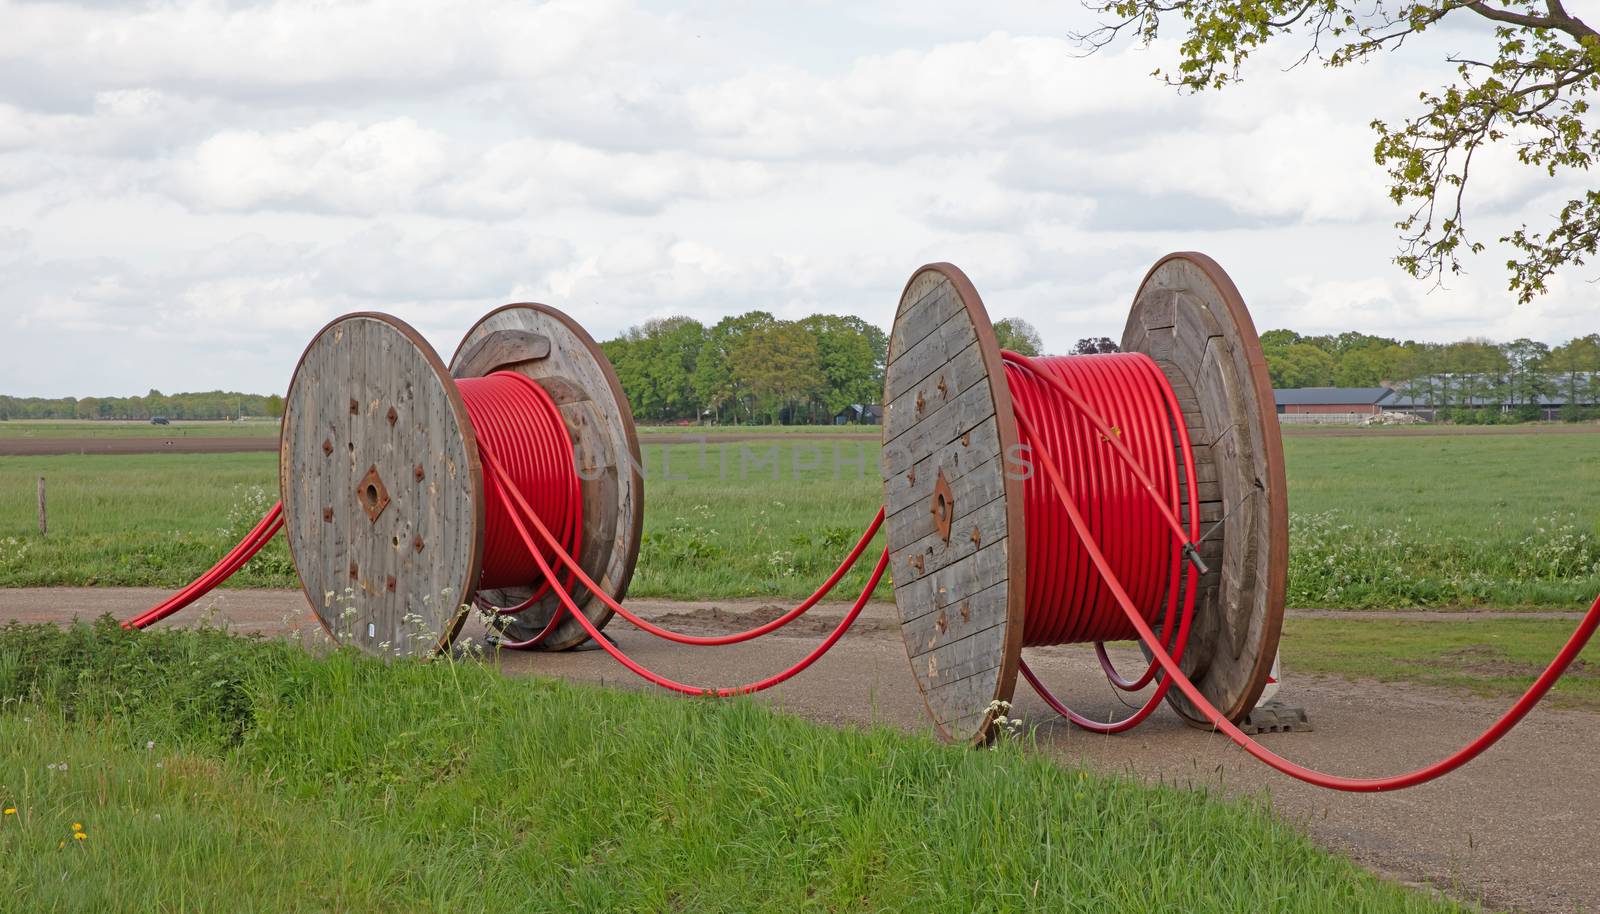 Huge roll of cable for underground cable installation  by michaklootwijk